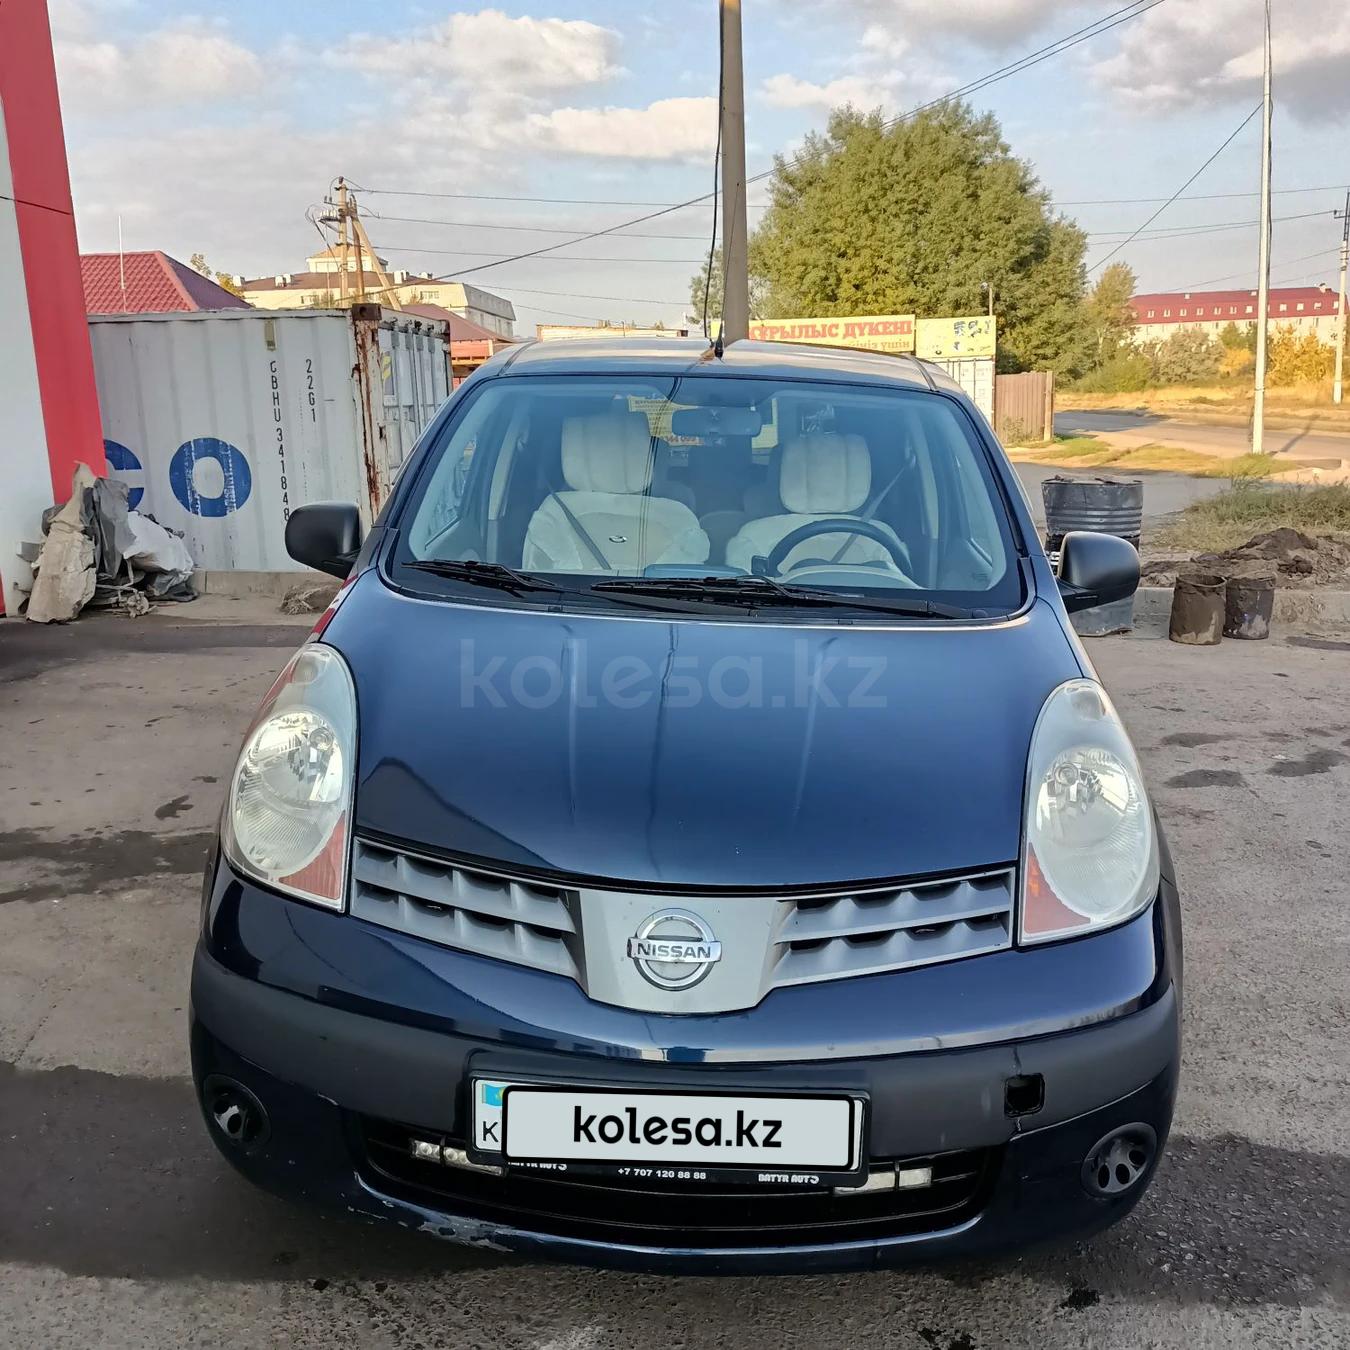 Nissan Note 2006 г.